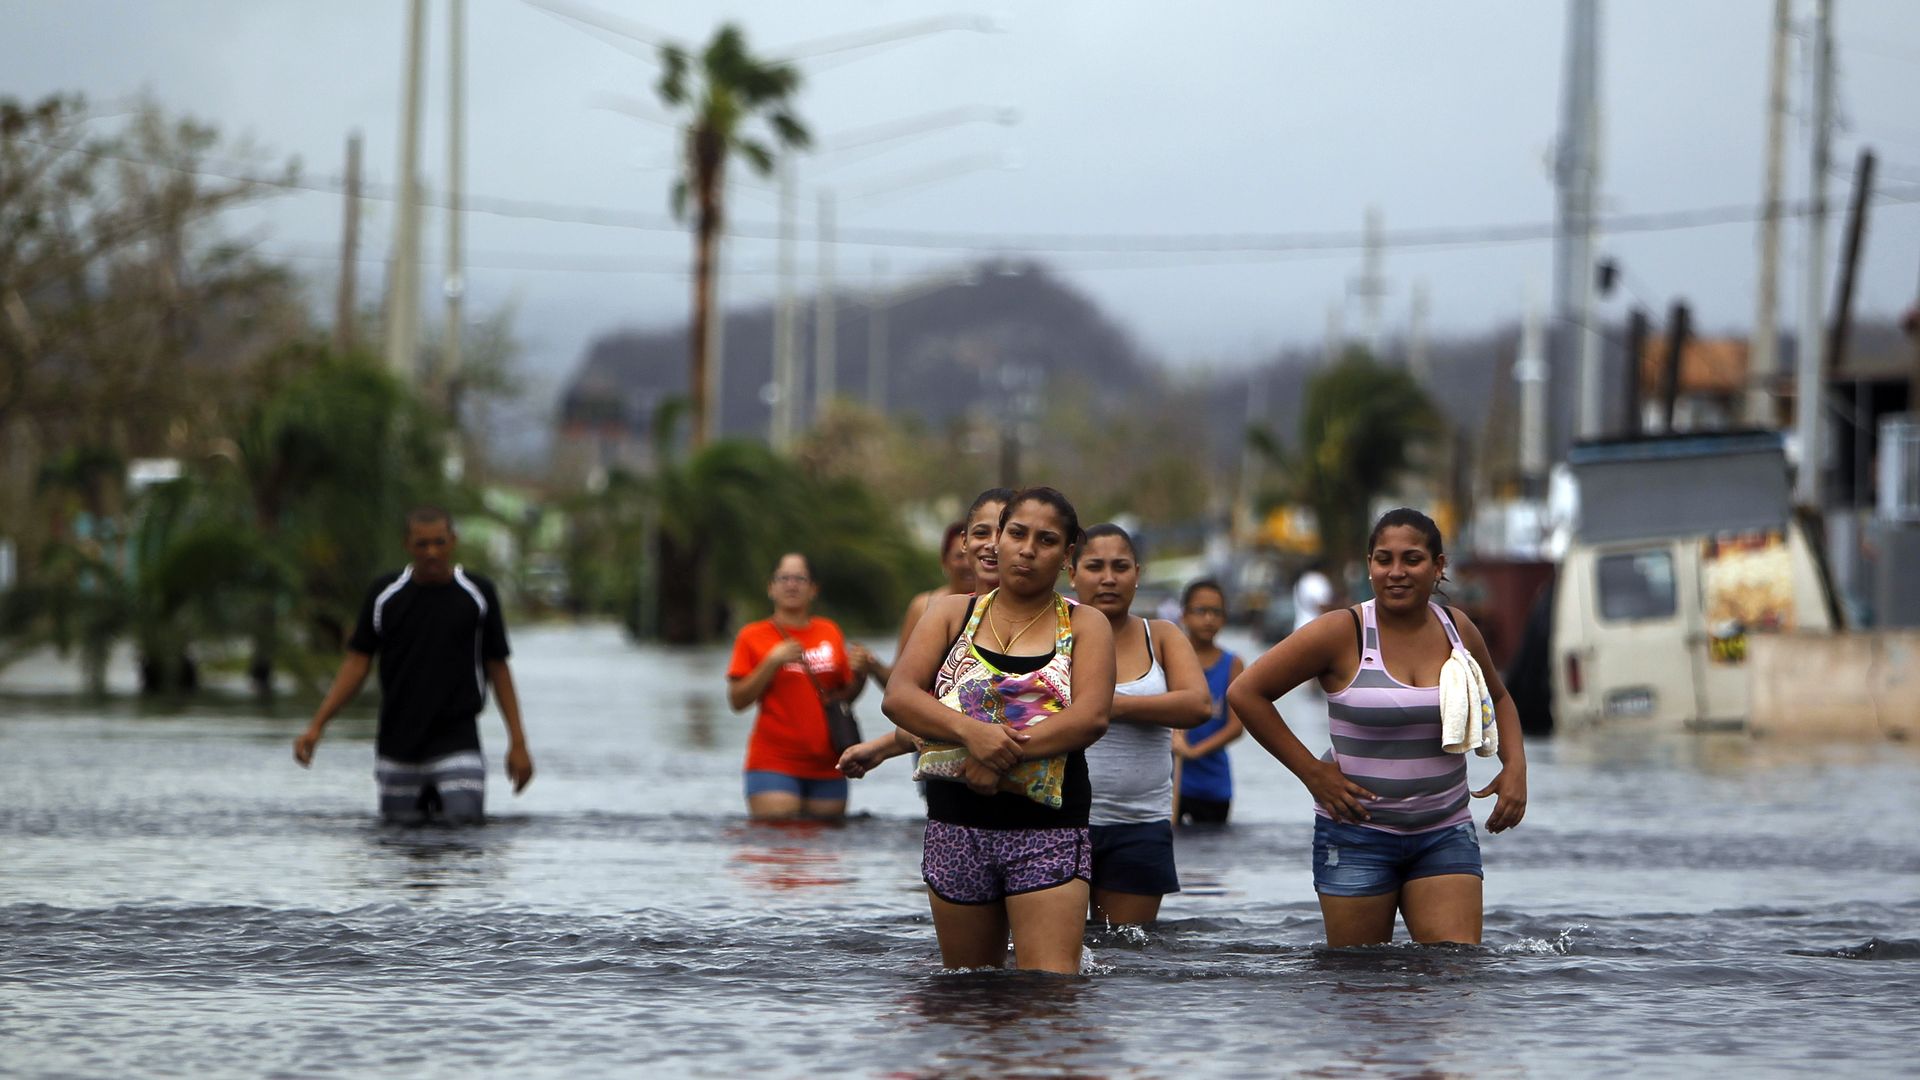 People walk on a flooded street in the aftermath of Hurricane Maria in San Juan, Puerto Rico on September 22, 2017.